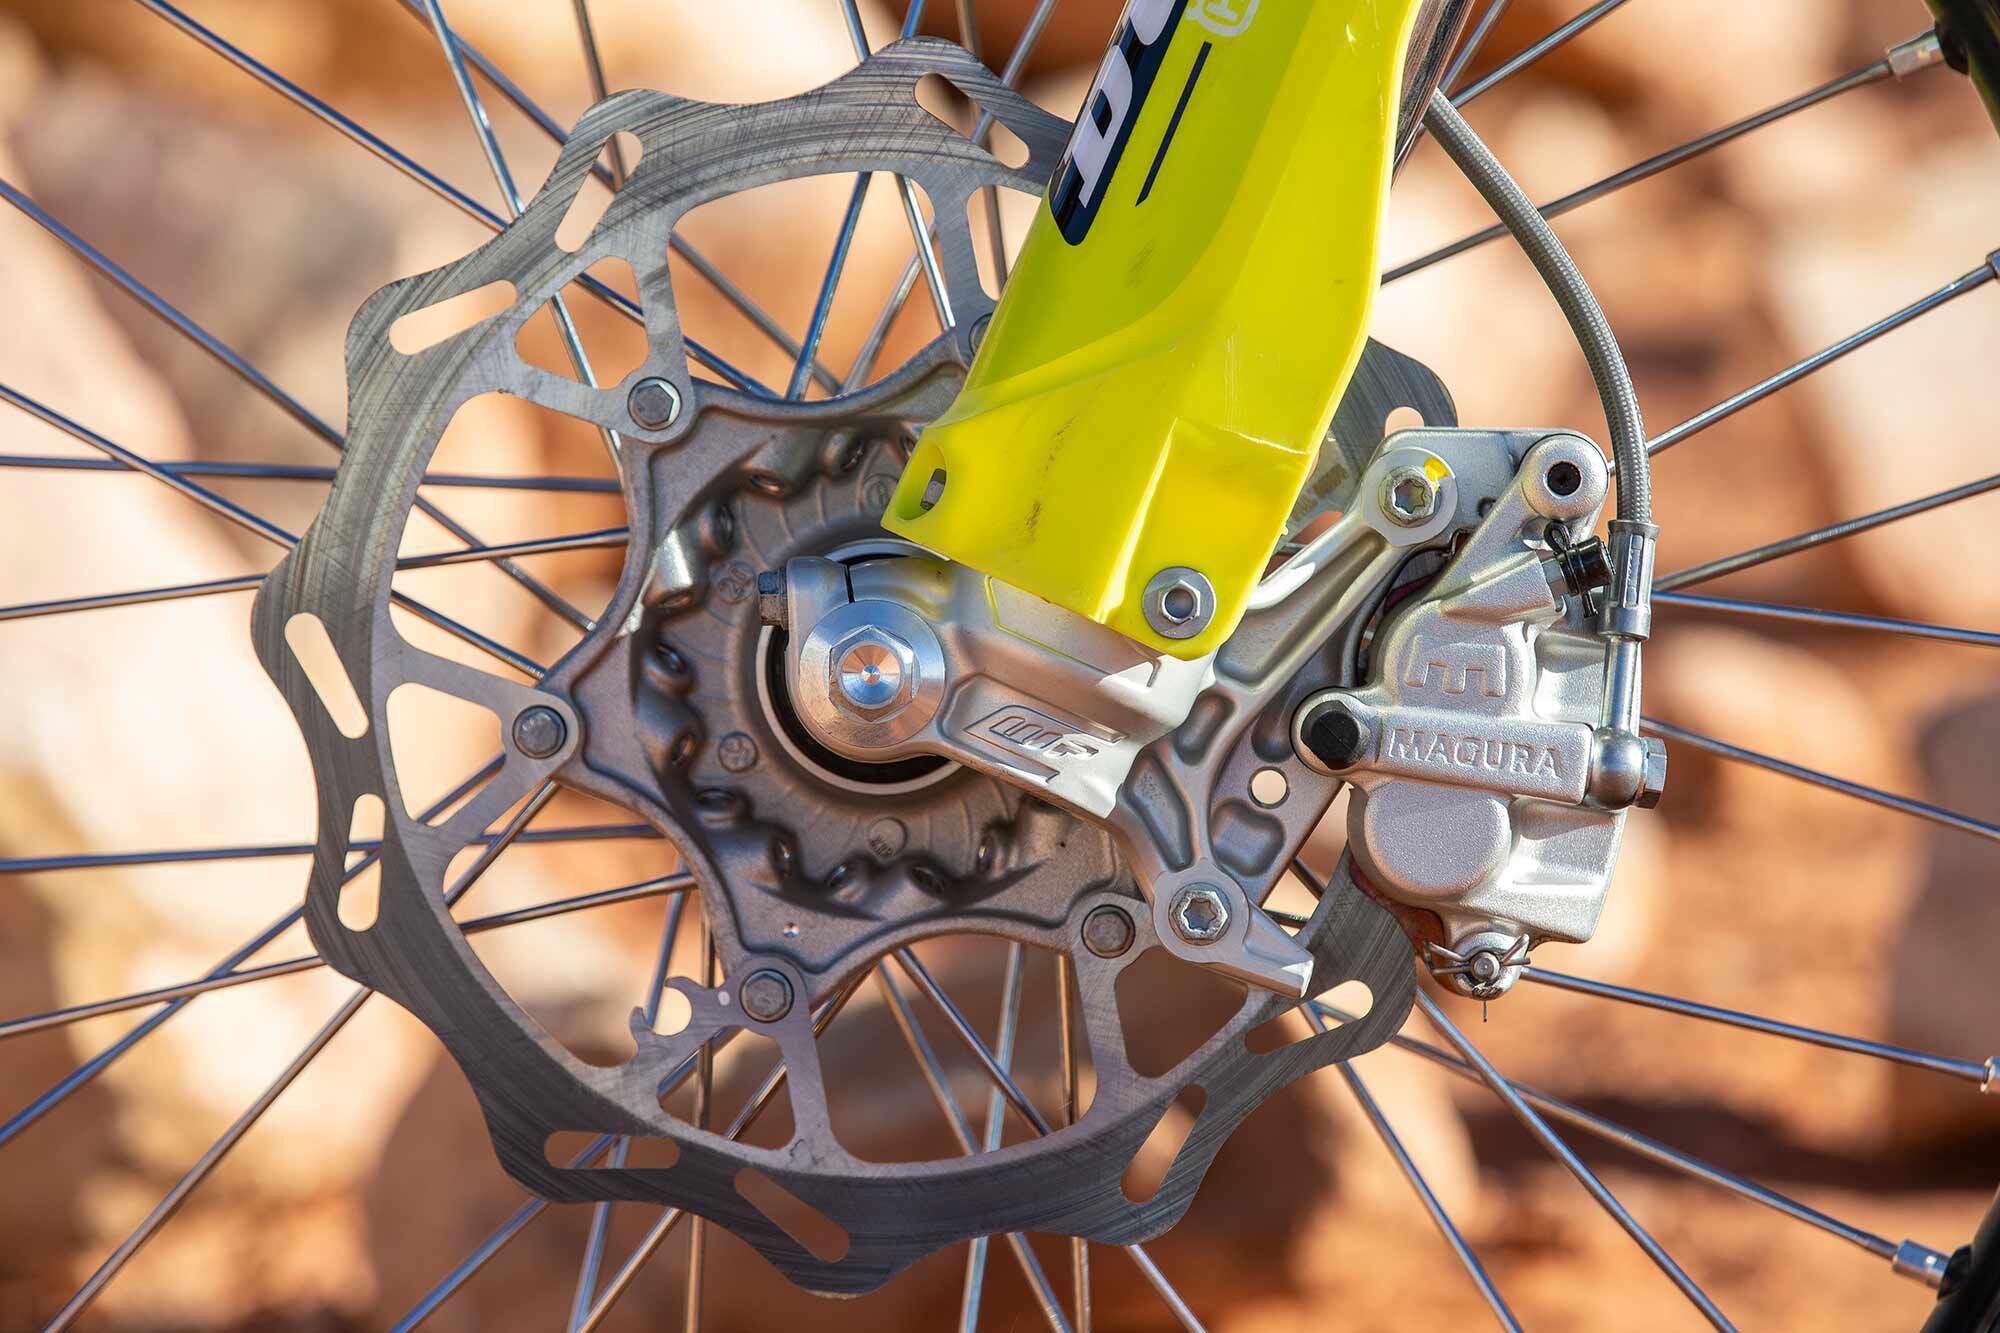 The FX 450’s Magura brakes don’t offer quite as much pucker power as the Brembos on the GasGas. But they have more bite than the Yamaha’s Nissin binders.